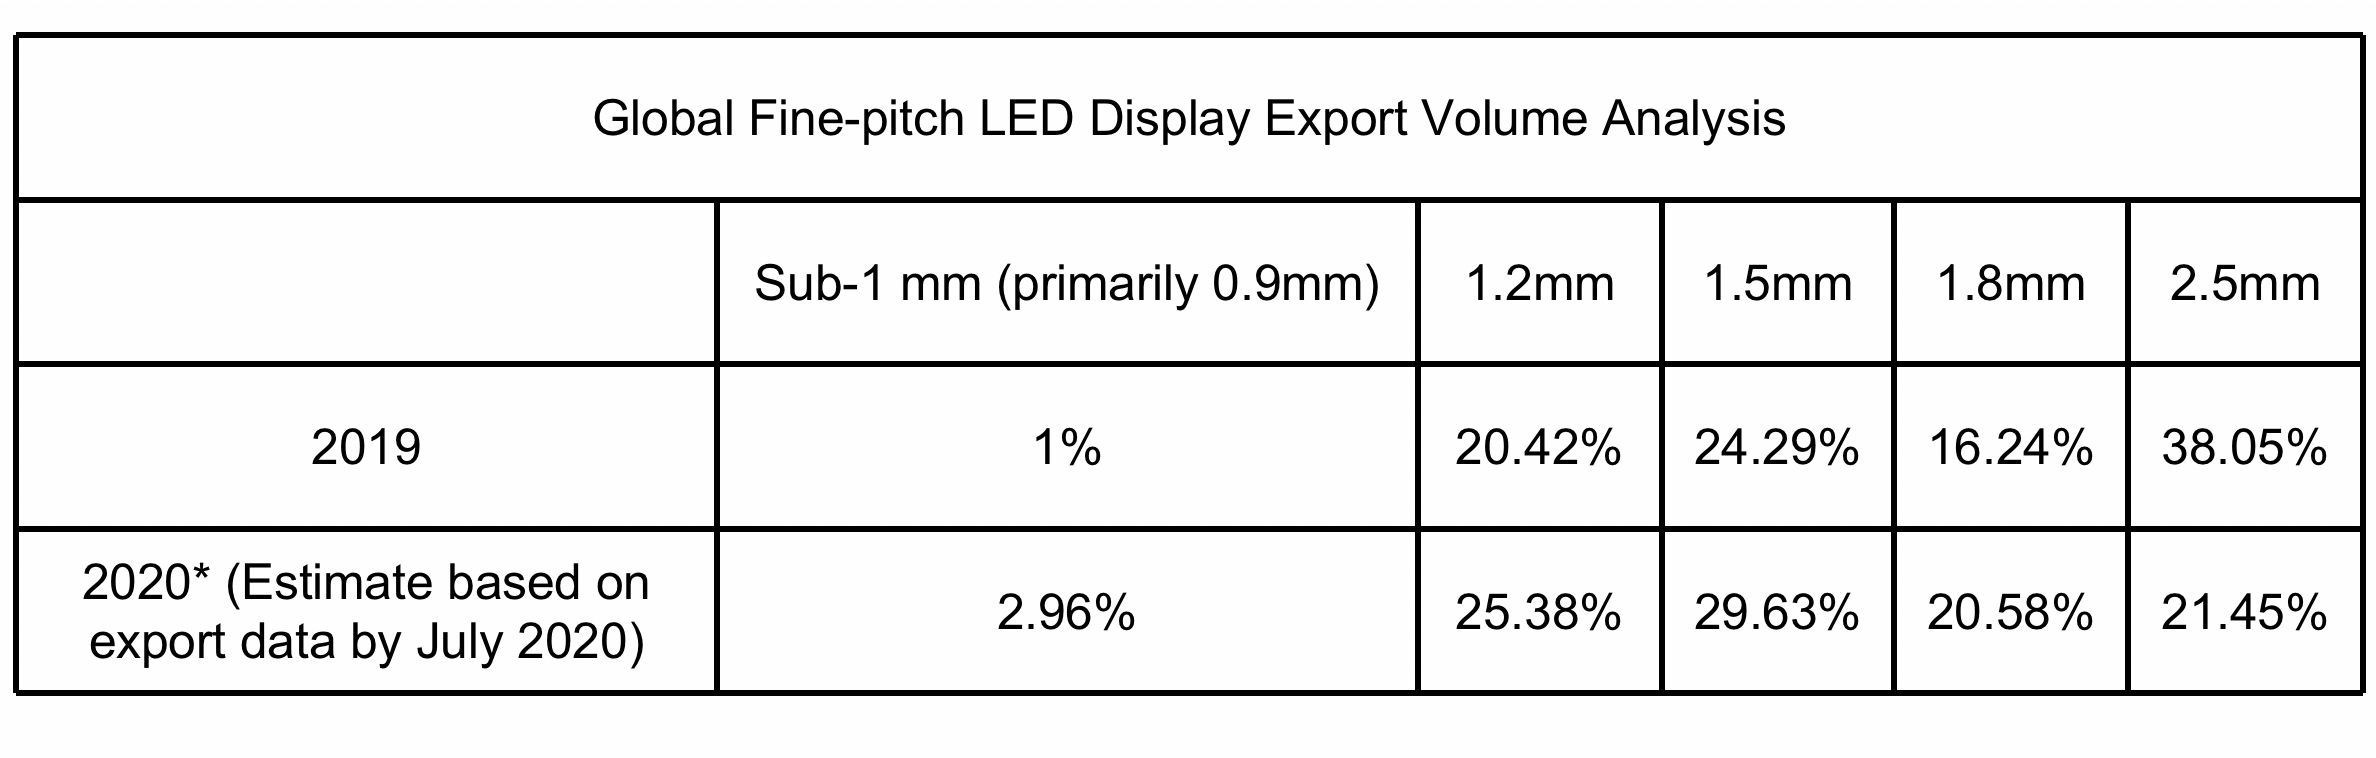 Global Fine-pitch LED Display Export Volume Analysis